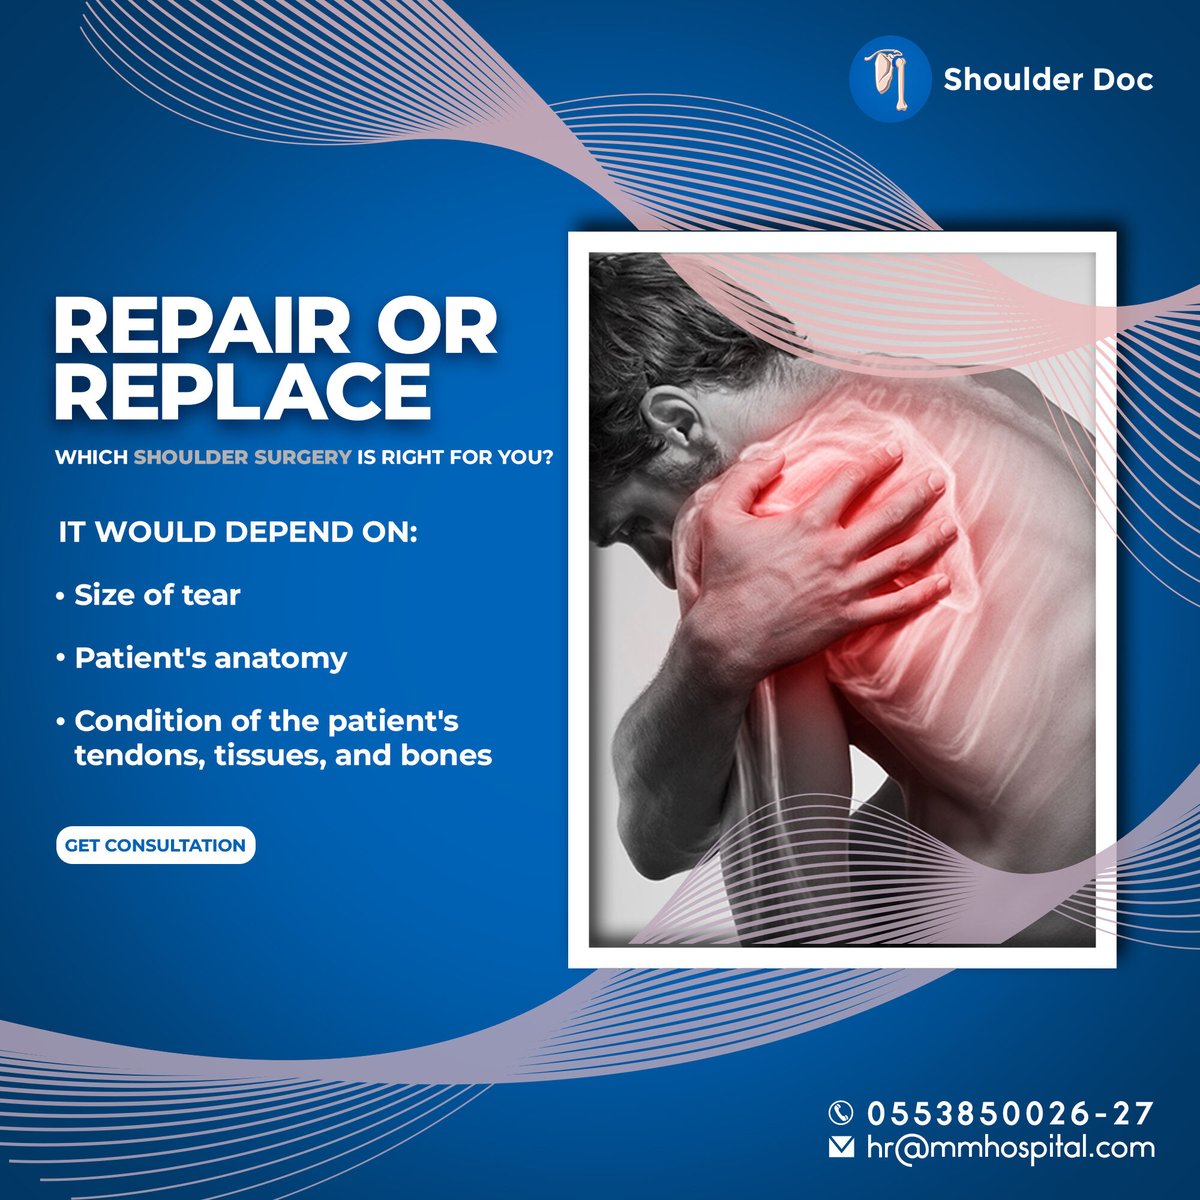 Are you wondering whether #shoulderrepair or #shoulderreplacement is right for your condition?

📱 Book an appointment now!

0553850026-27

📍 Mazhar Memorial Hospital, 1/3-A satellite town app DC office sialkot road Gujranwala

#shoulderdoctor #shoulderdoc #shoulderpain